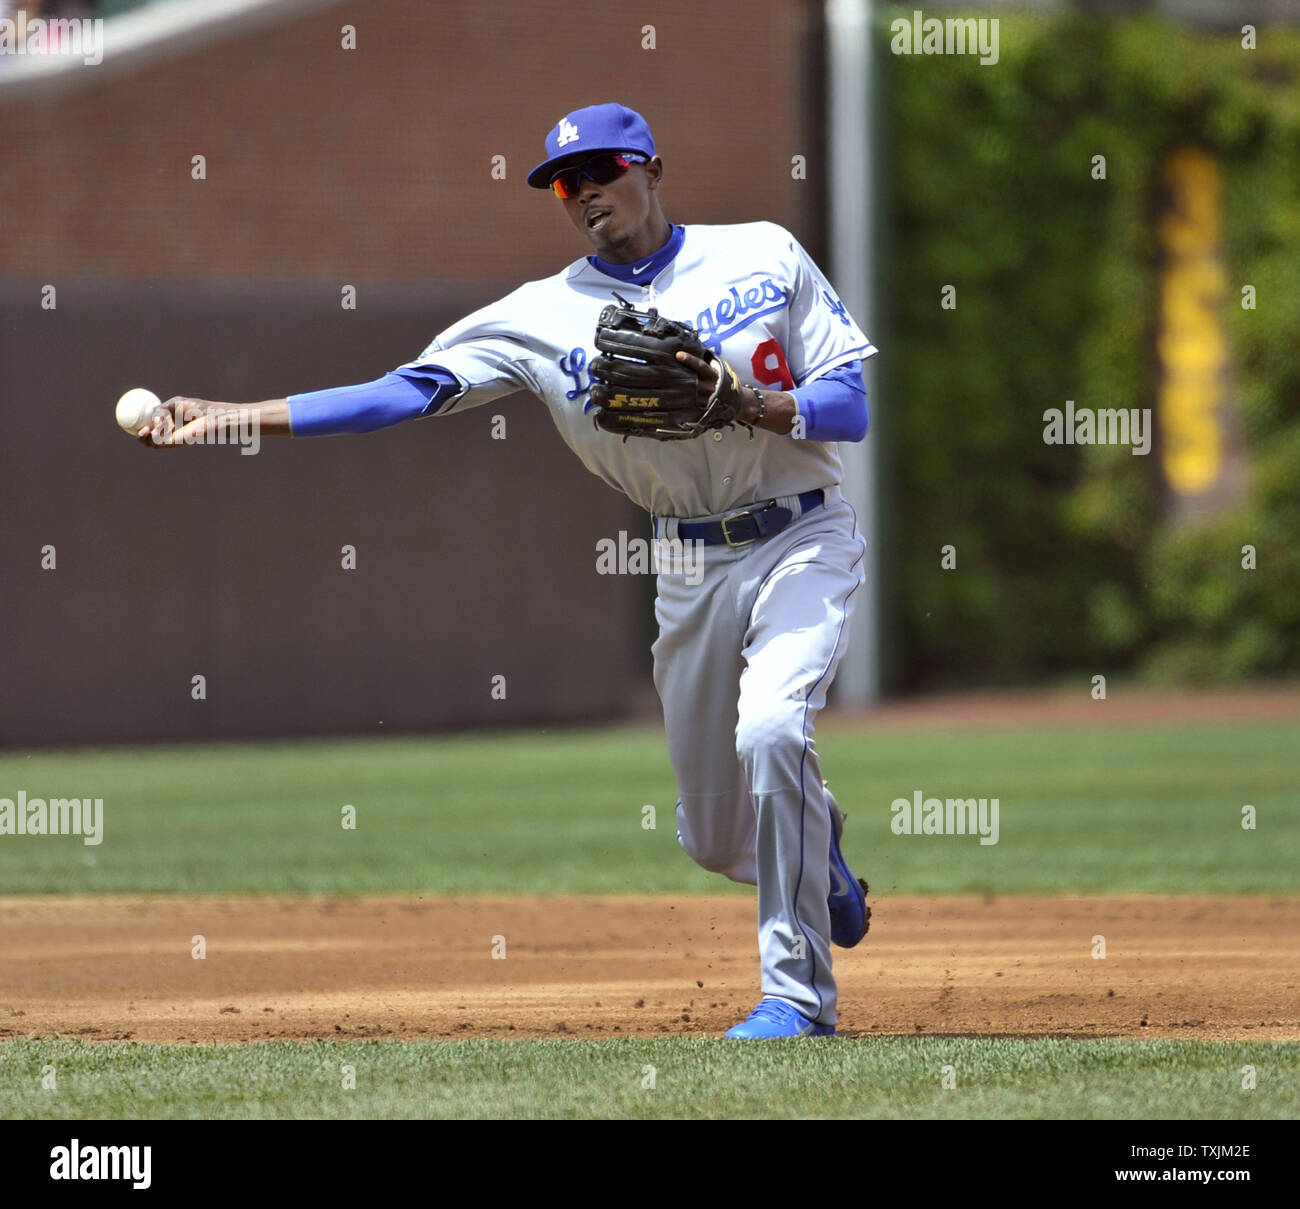 Los Angeles Dodgers shortstop Dee Gordon throws to first base to